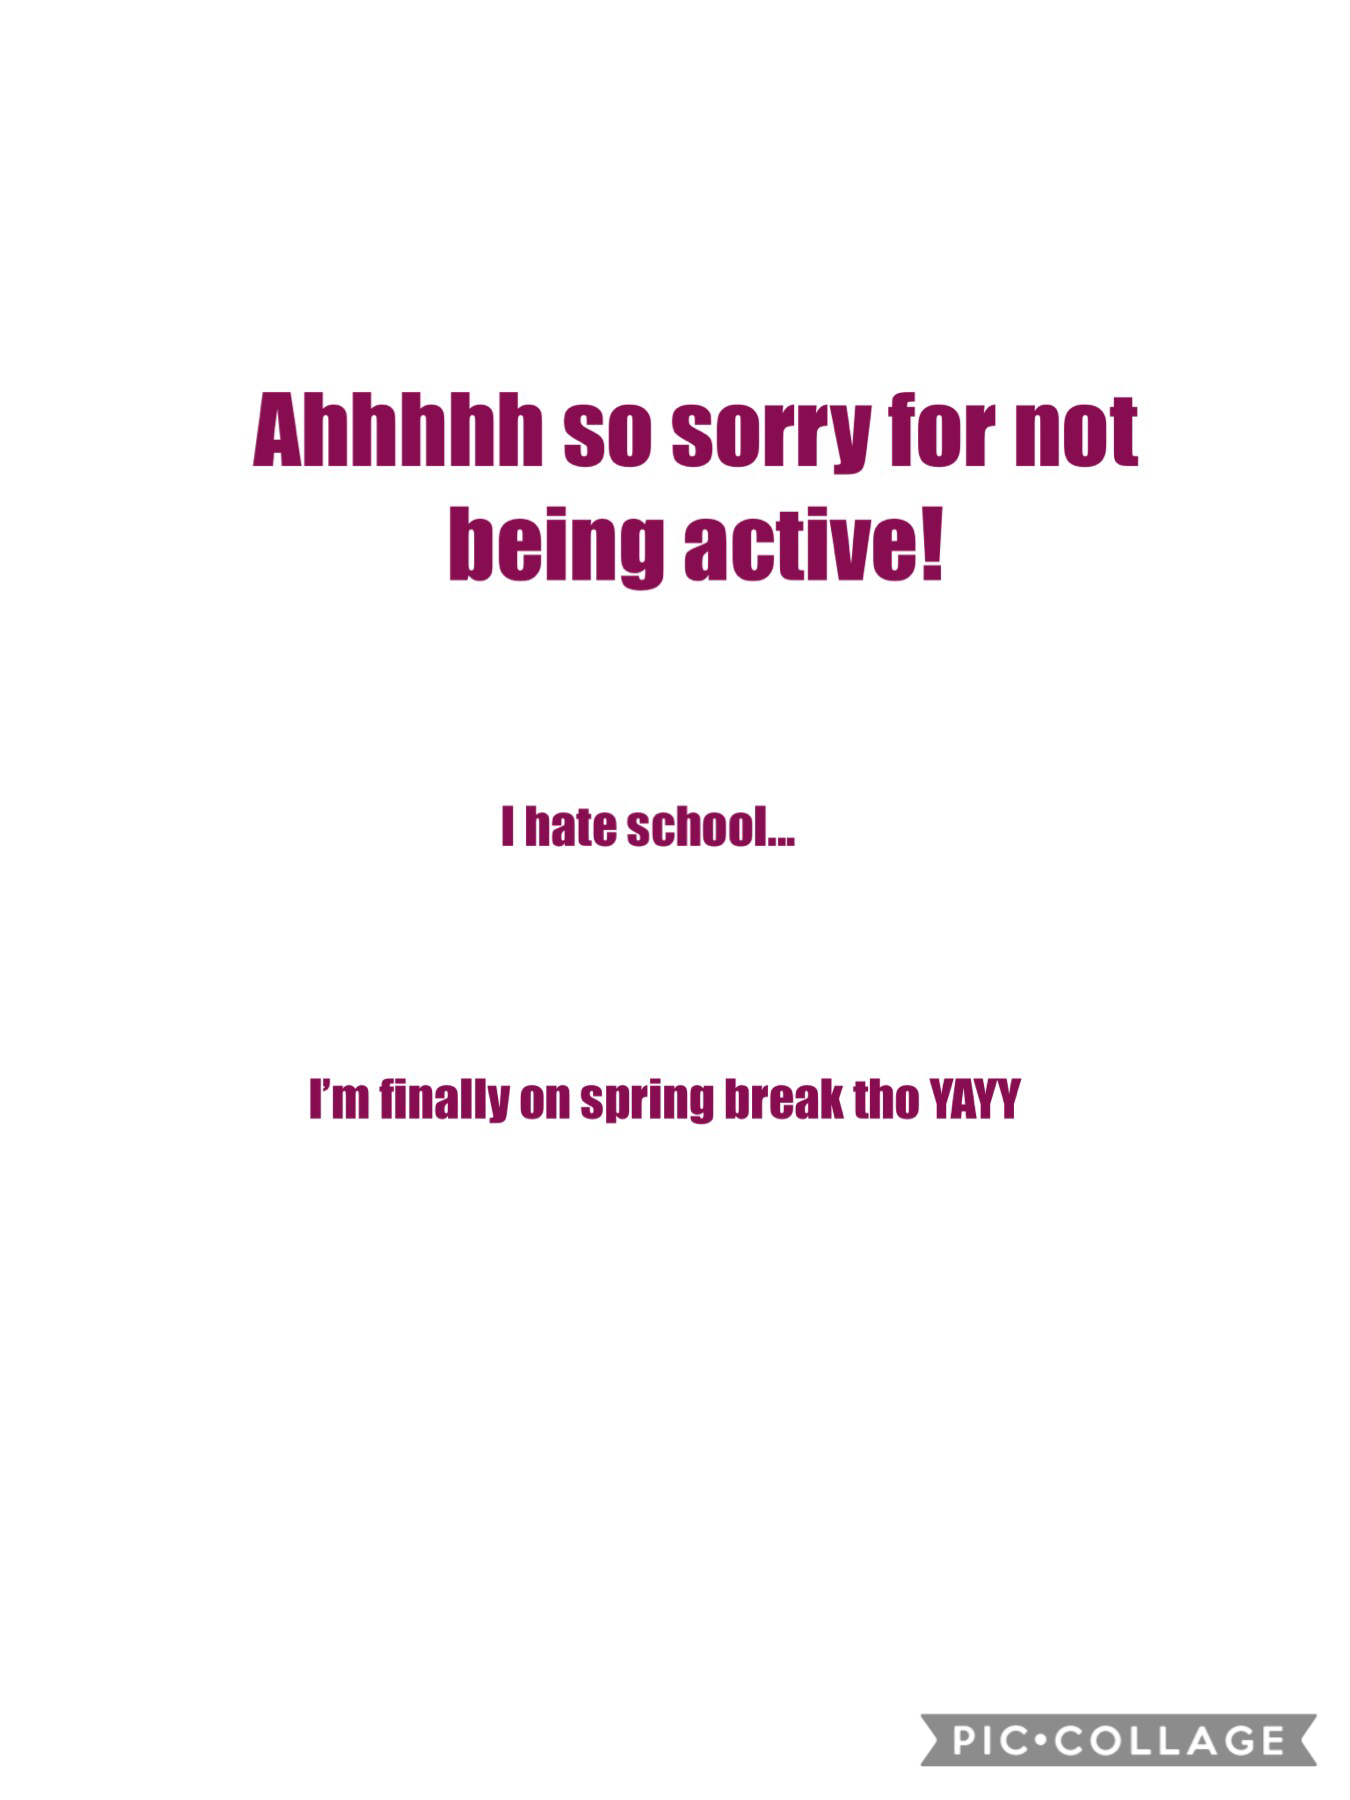 Tappy :c
sorryyy I’ll be more active this week cuz I have spring break <3